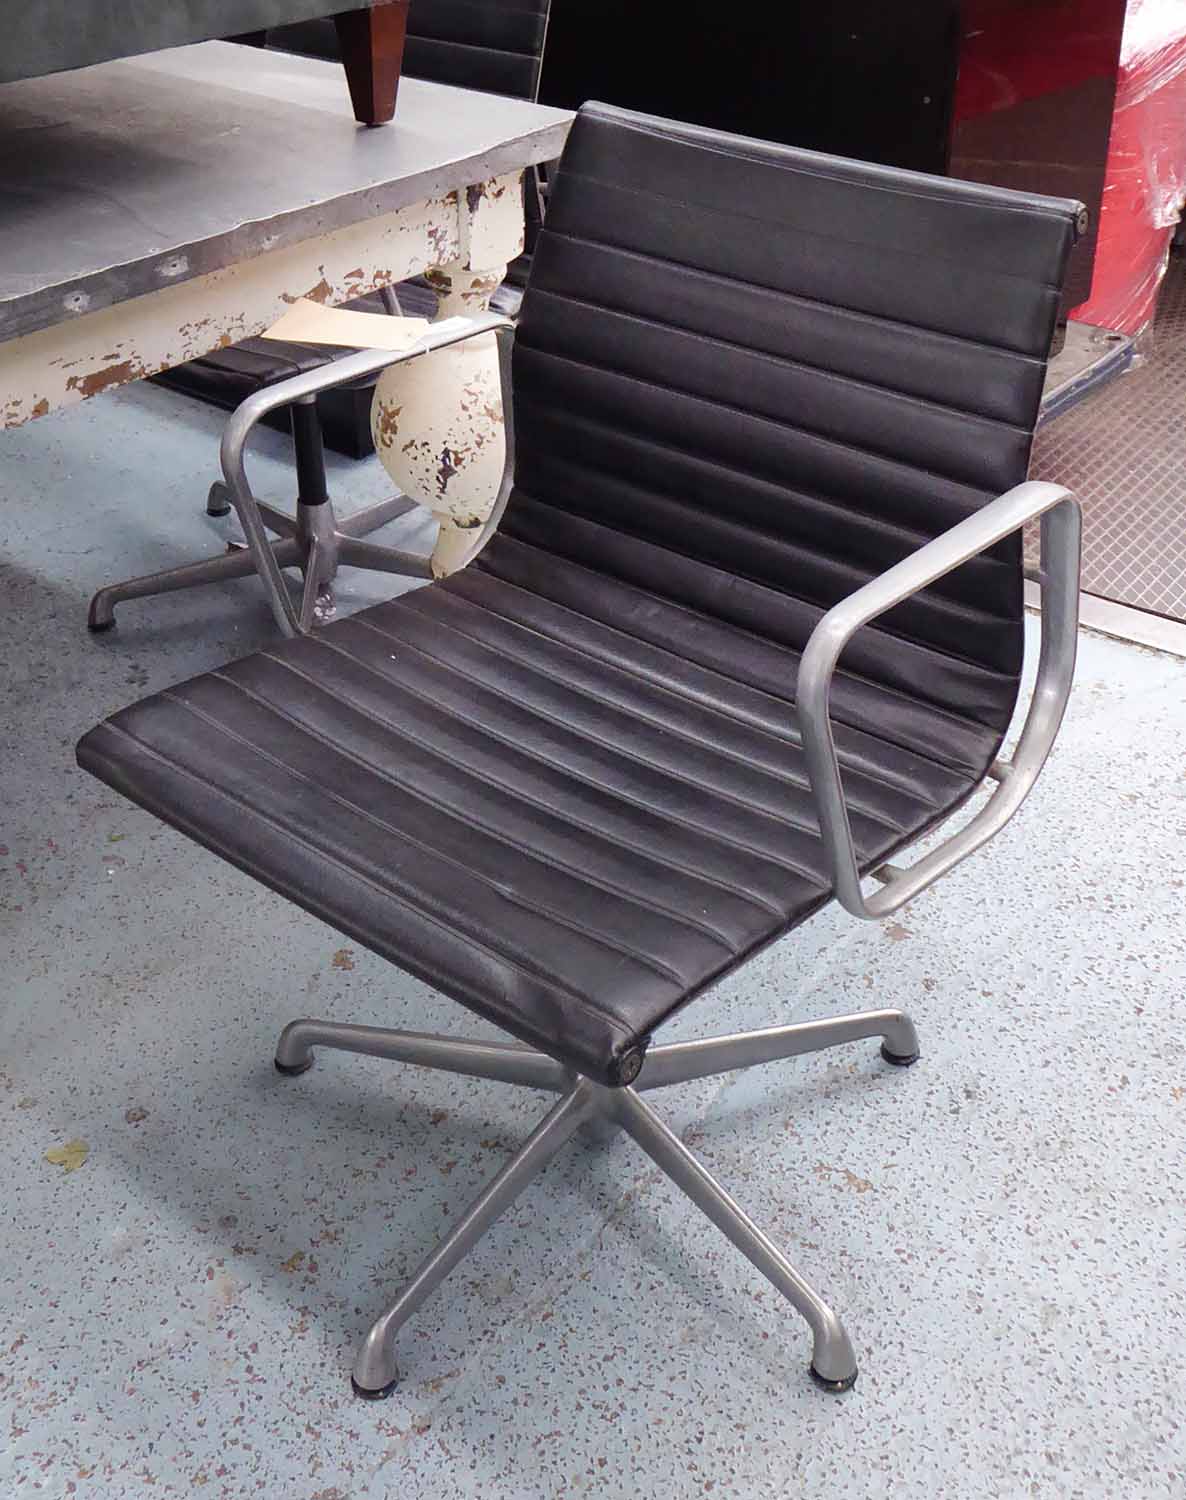 ICF UNDER HERMAN MILLER LICENCE EA107 CHAIR, by Charles & Ray Eames circa 1973 production, 87cm H.